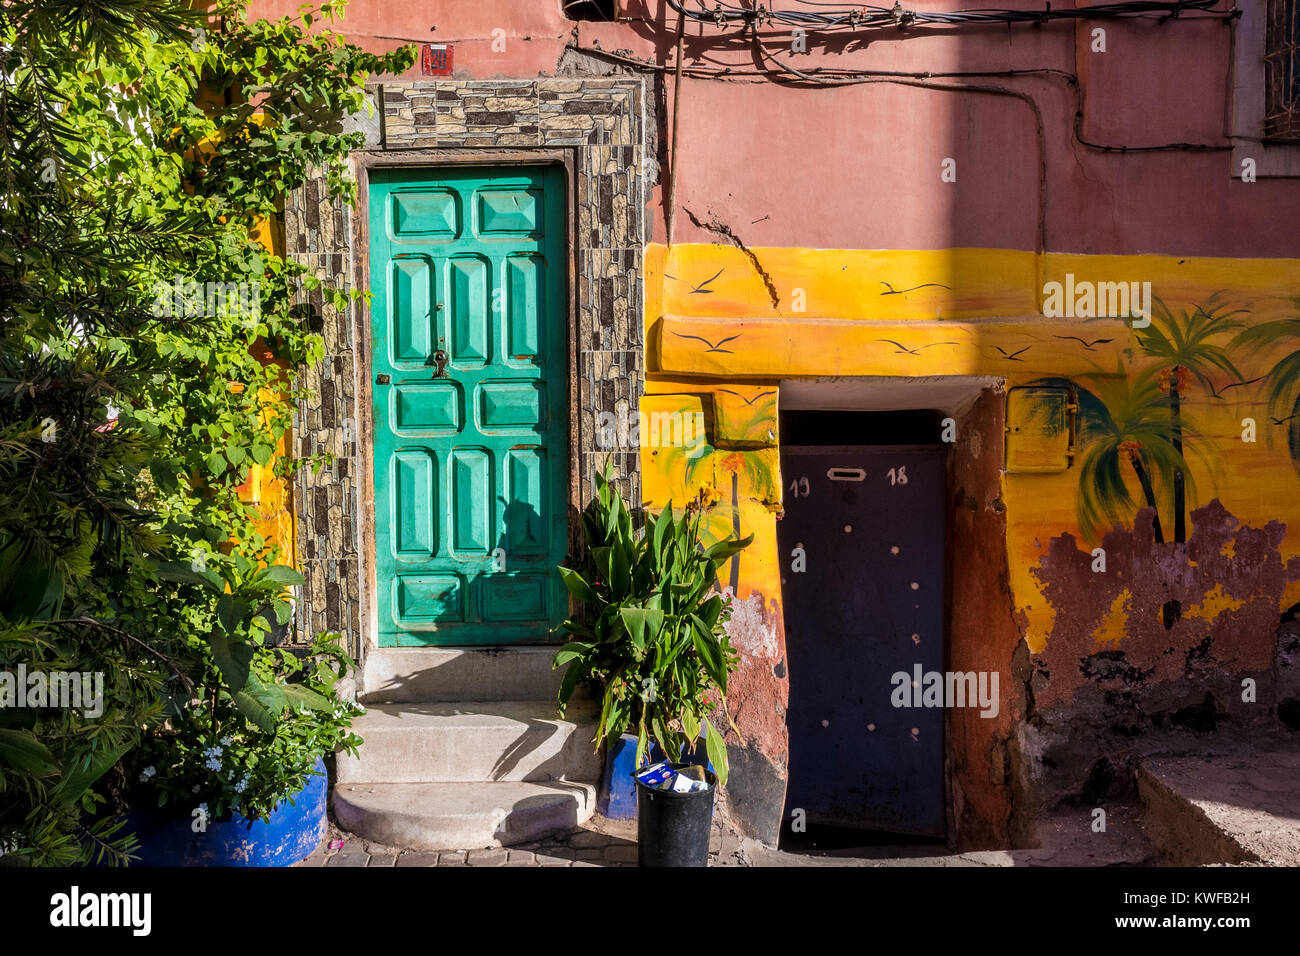 Back street in the medina with traditional architecture, windows, doors and arches. Stock Photo